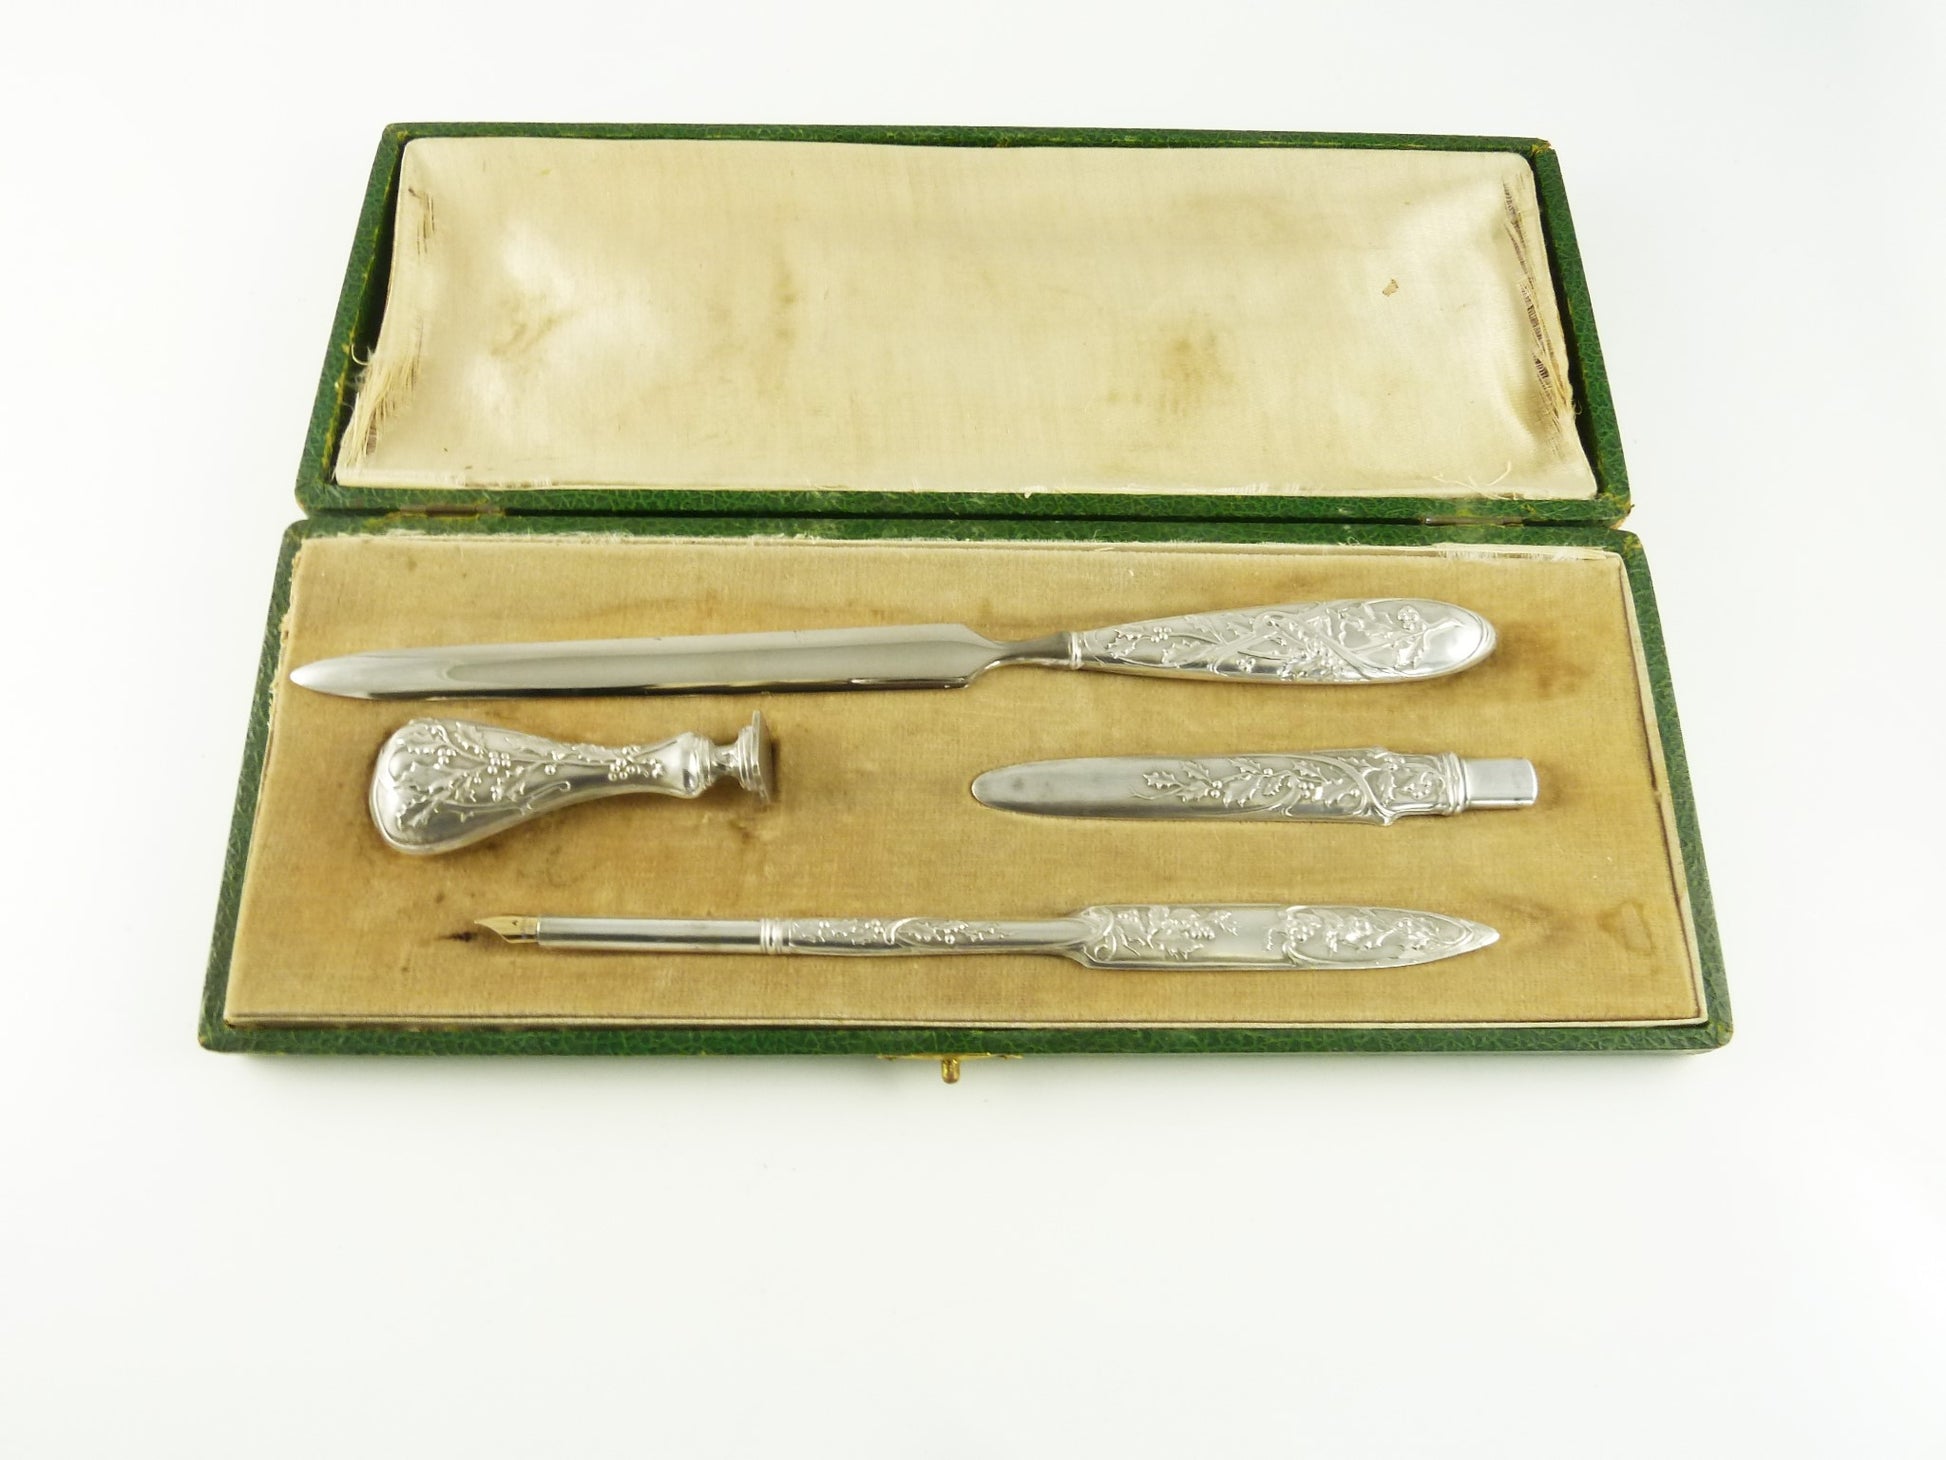 Antique French Silver Desk Set, Four Pieces Writing Tools, Dip Pen, Letter Opener, Seal, Pencil - 43 Chesapeake Court Antiques